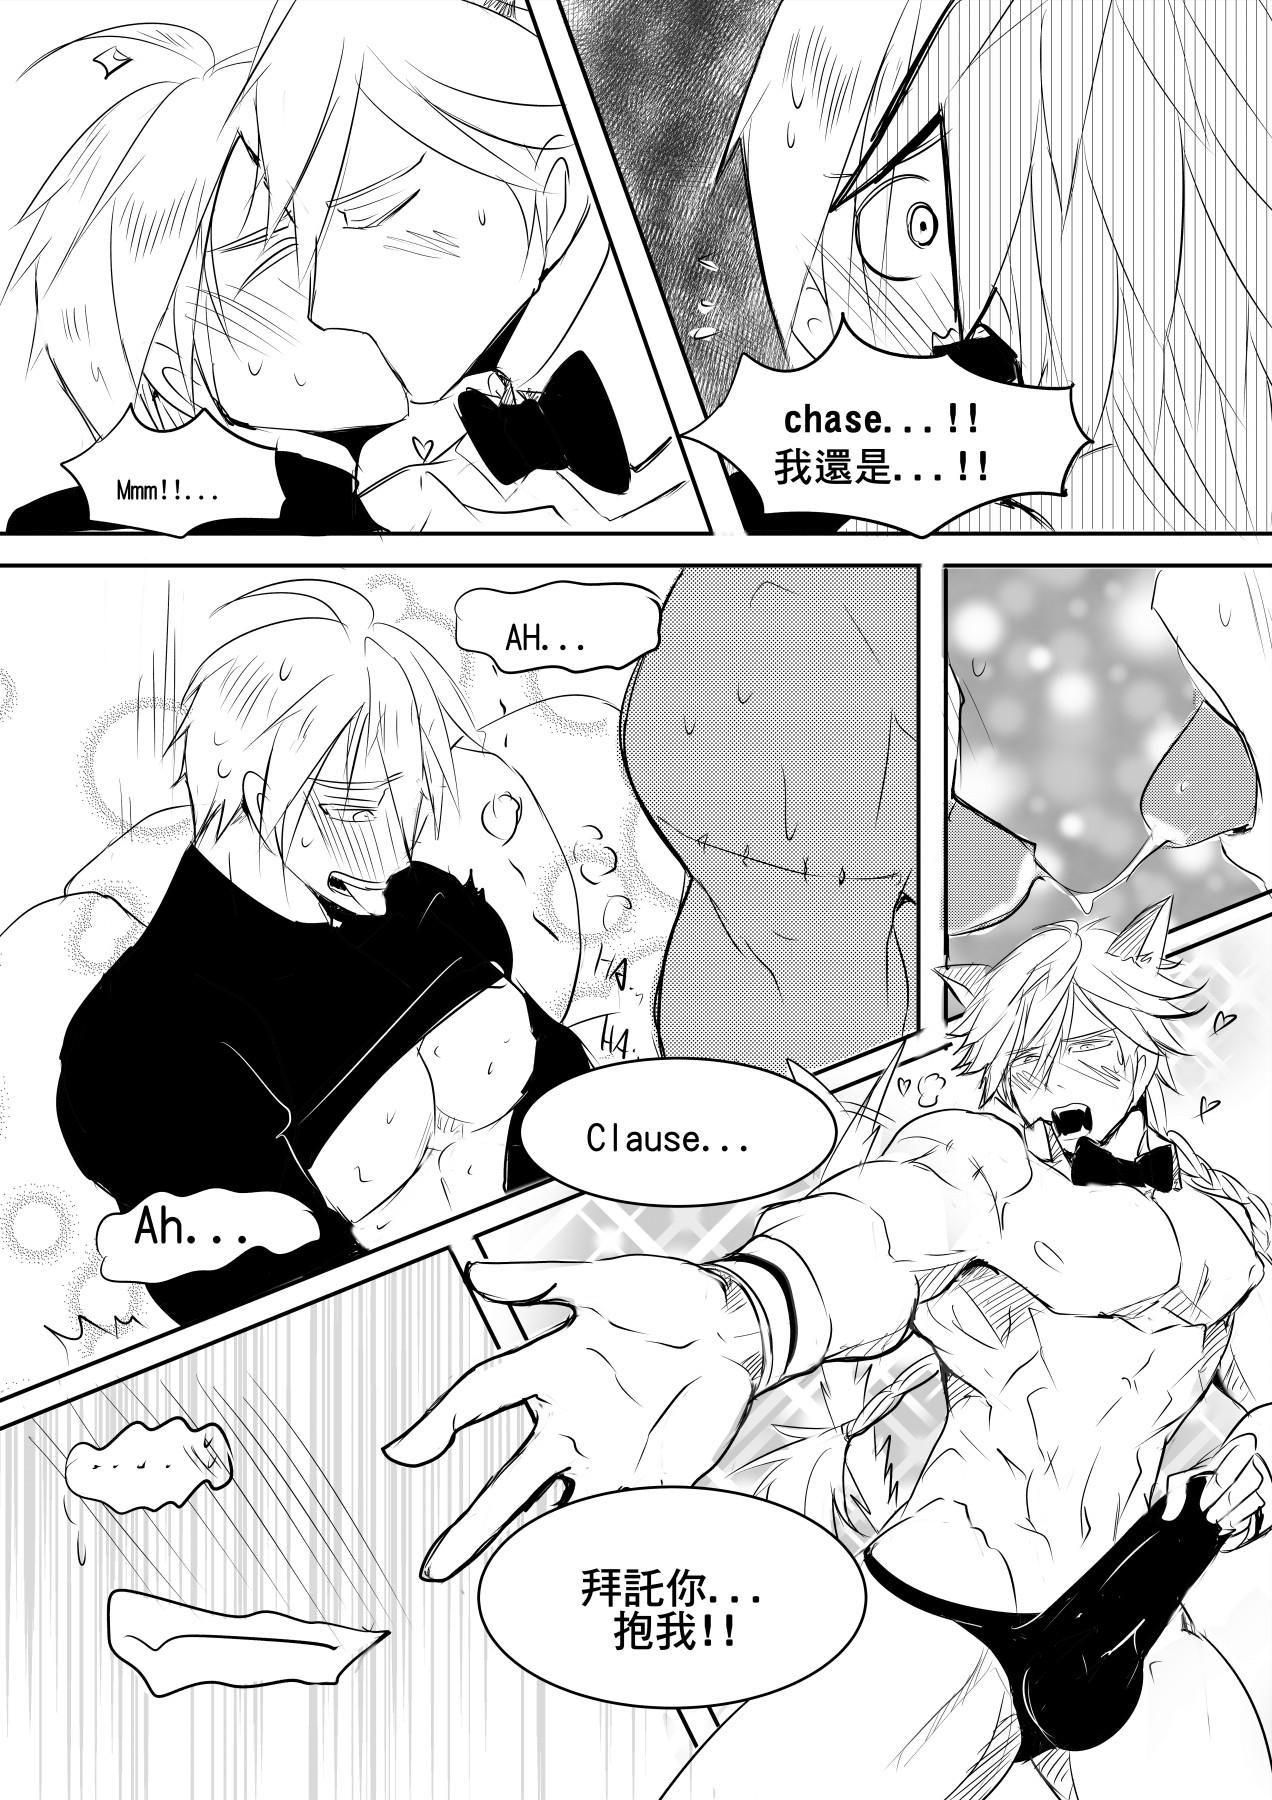 Trap at your service - Kings raid Sex - Page 9